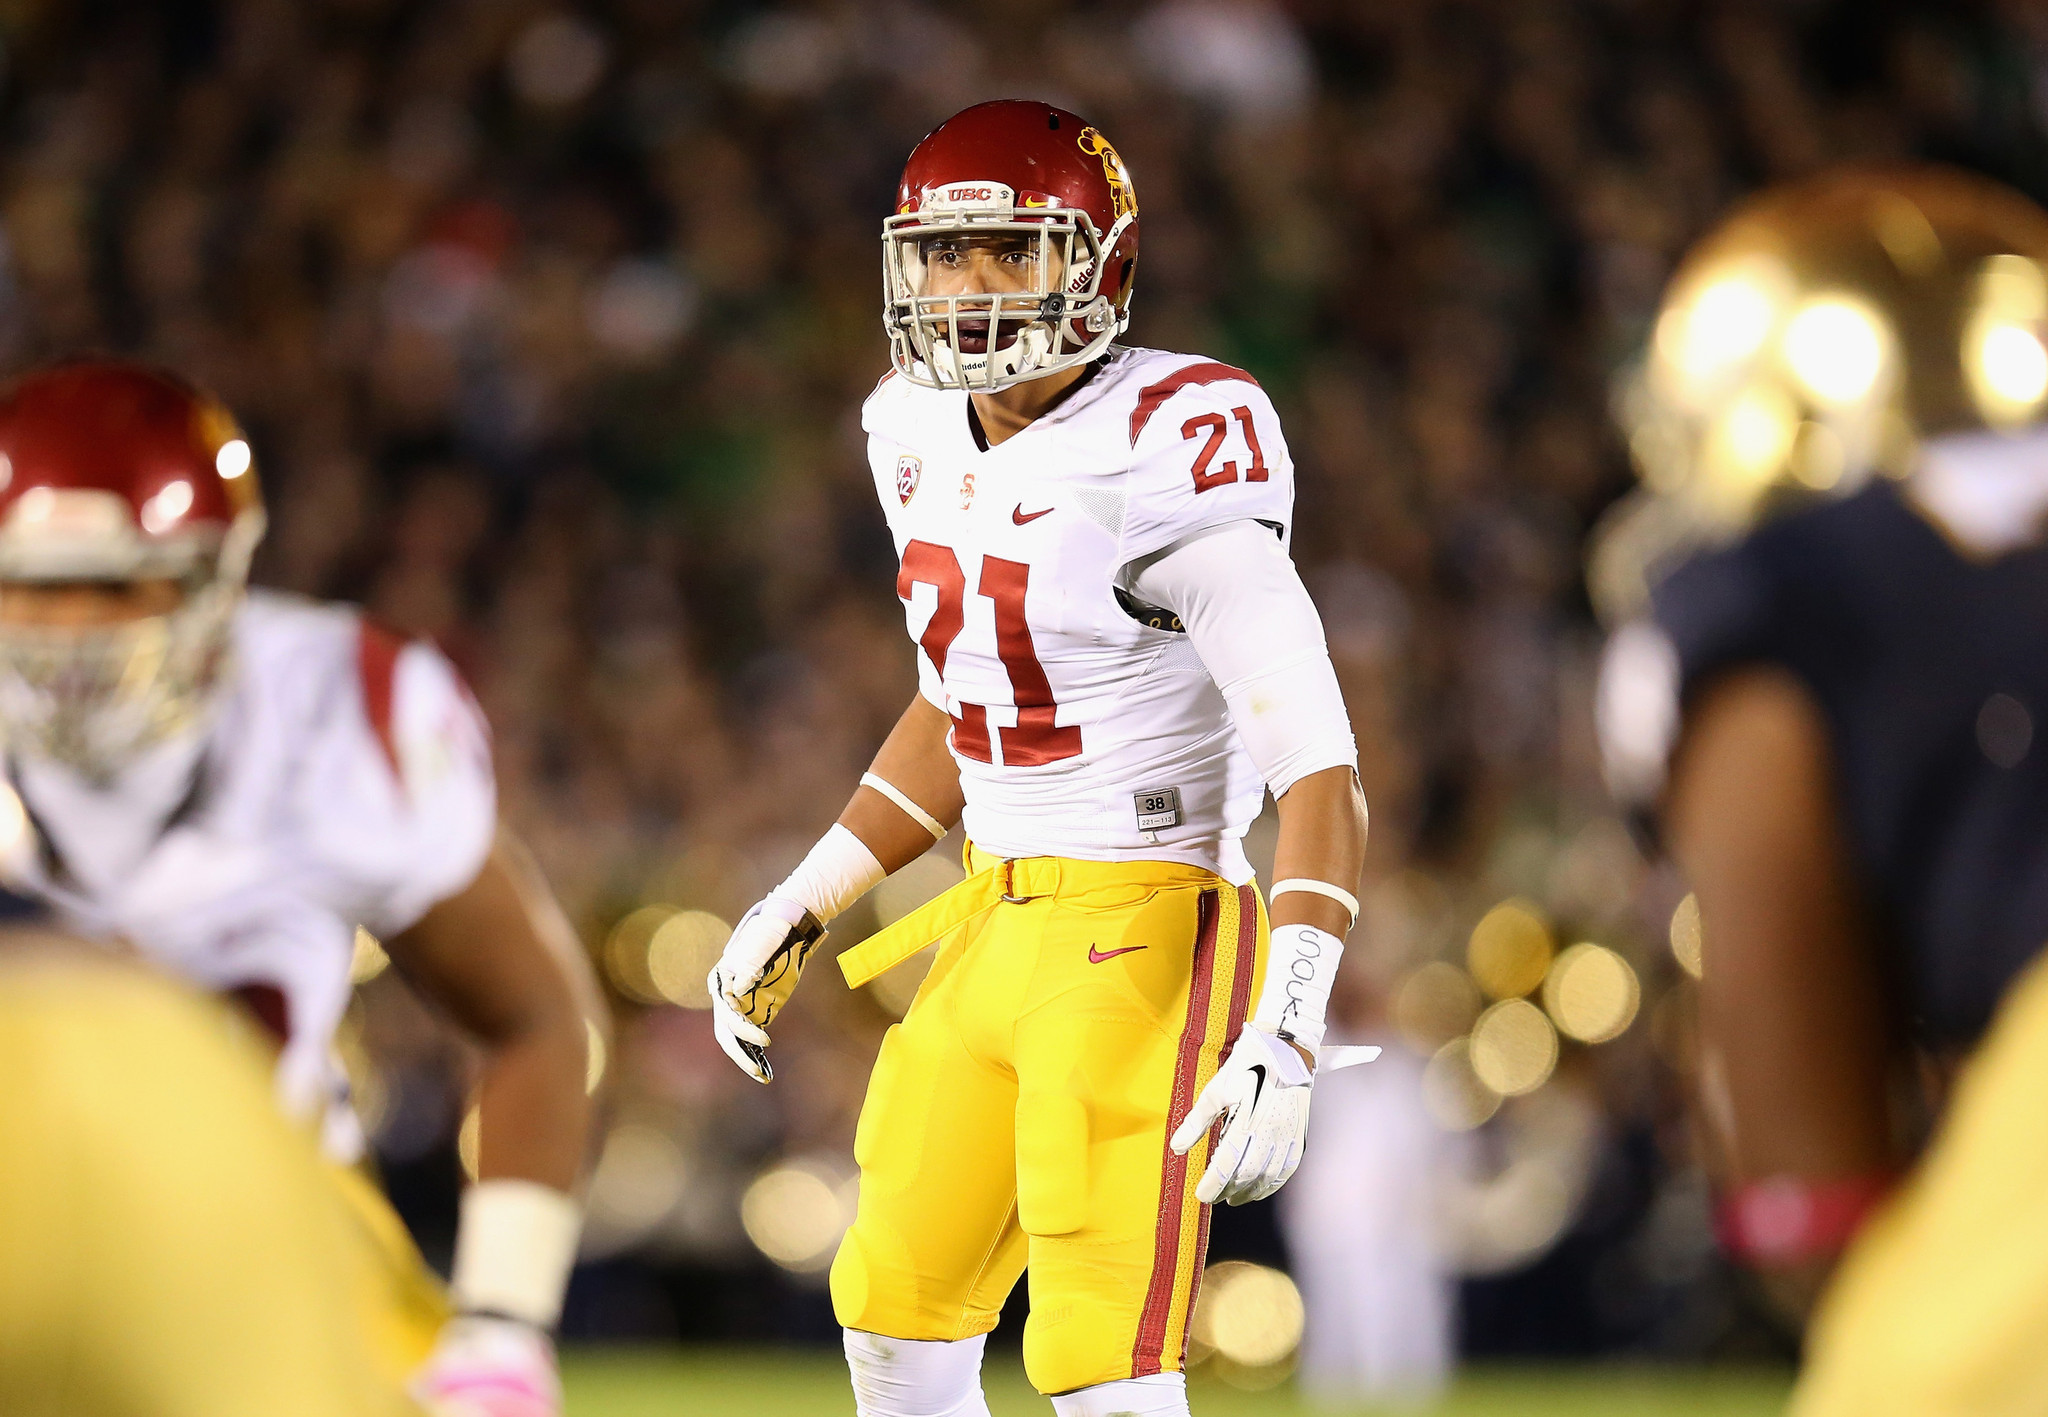 Alternate USC football uniforms? Not this season, but maybe in future